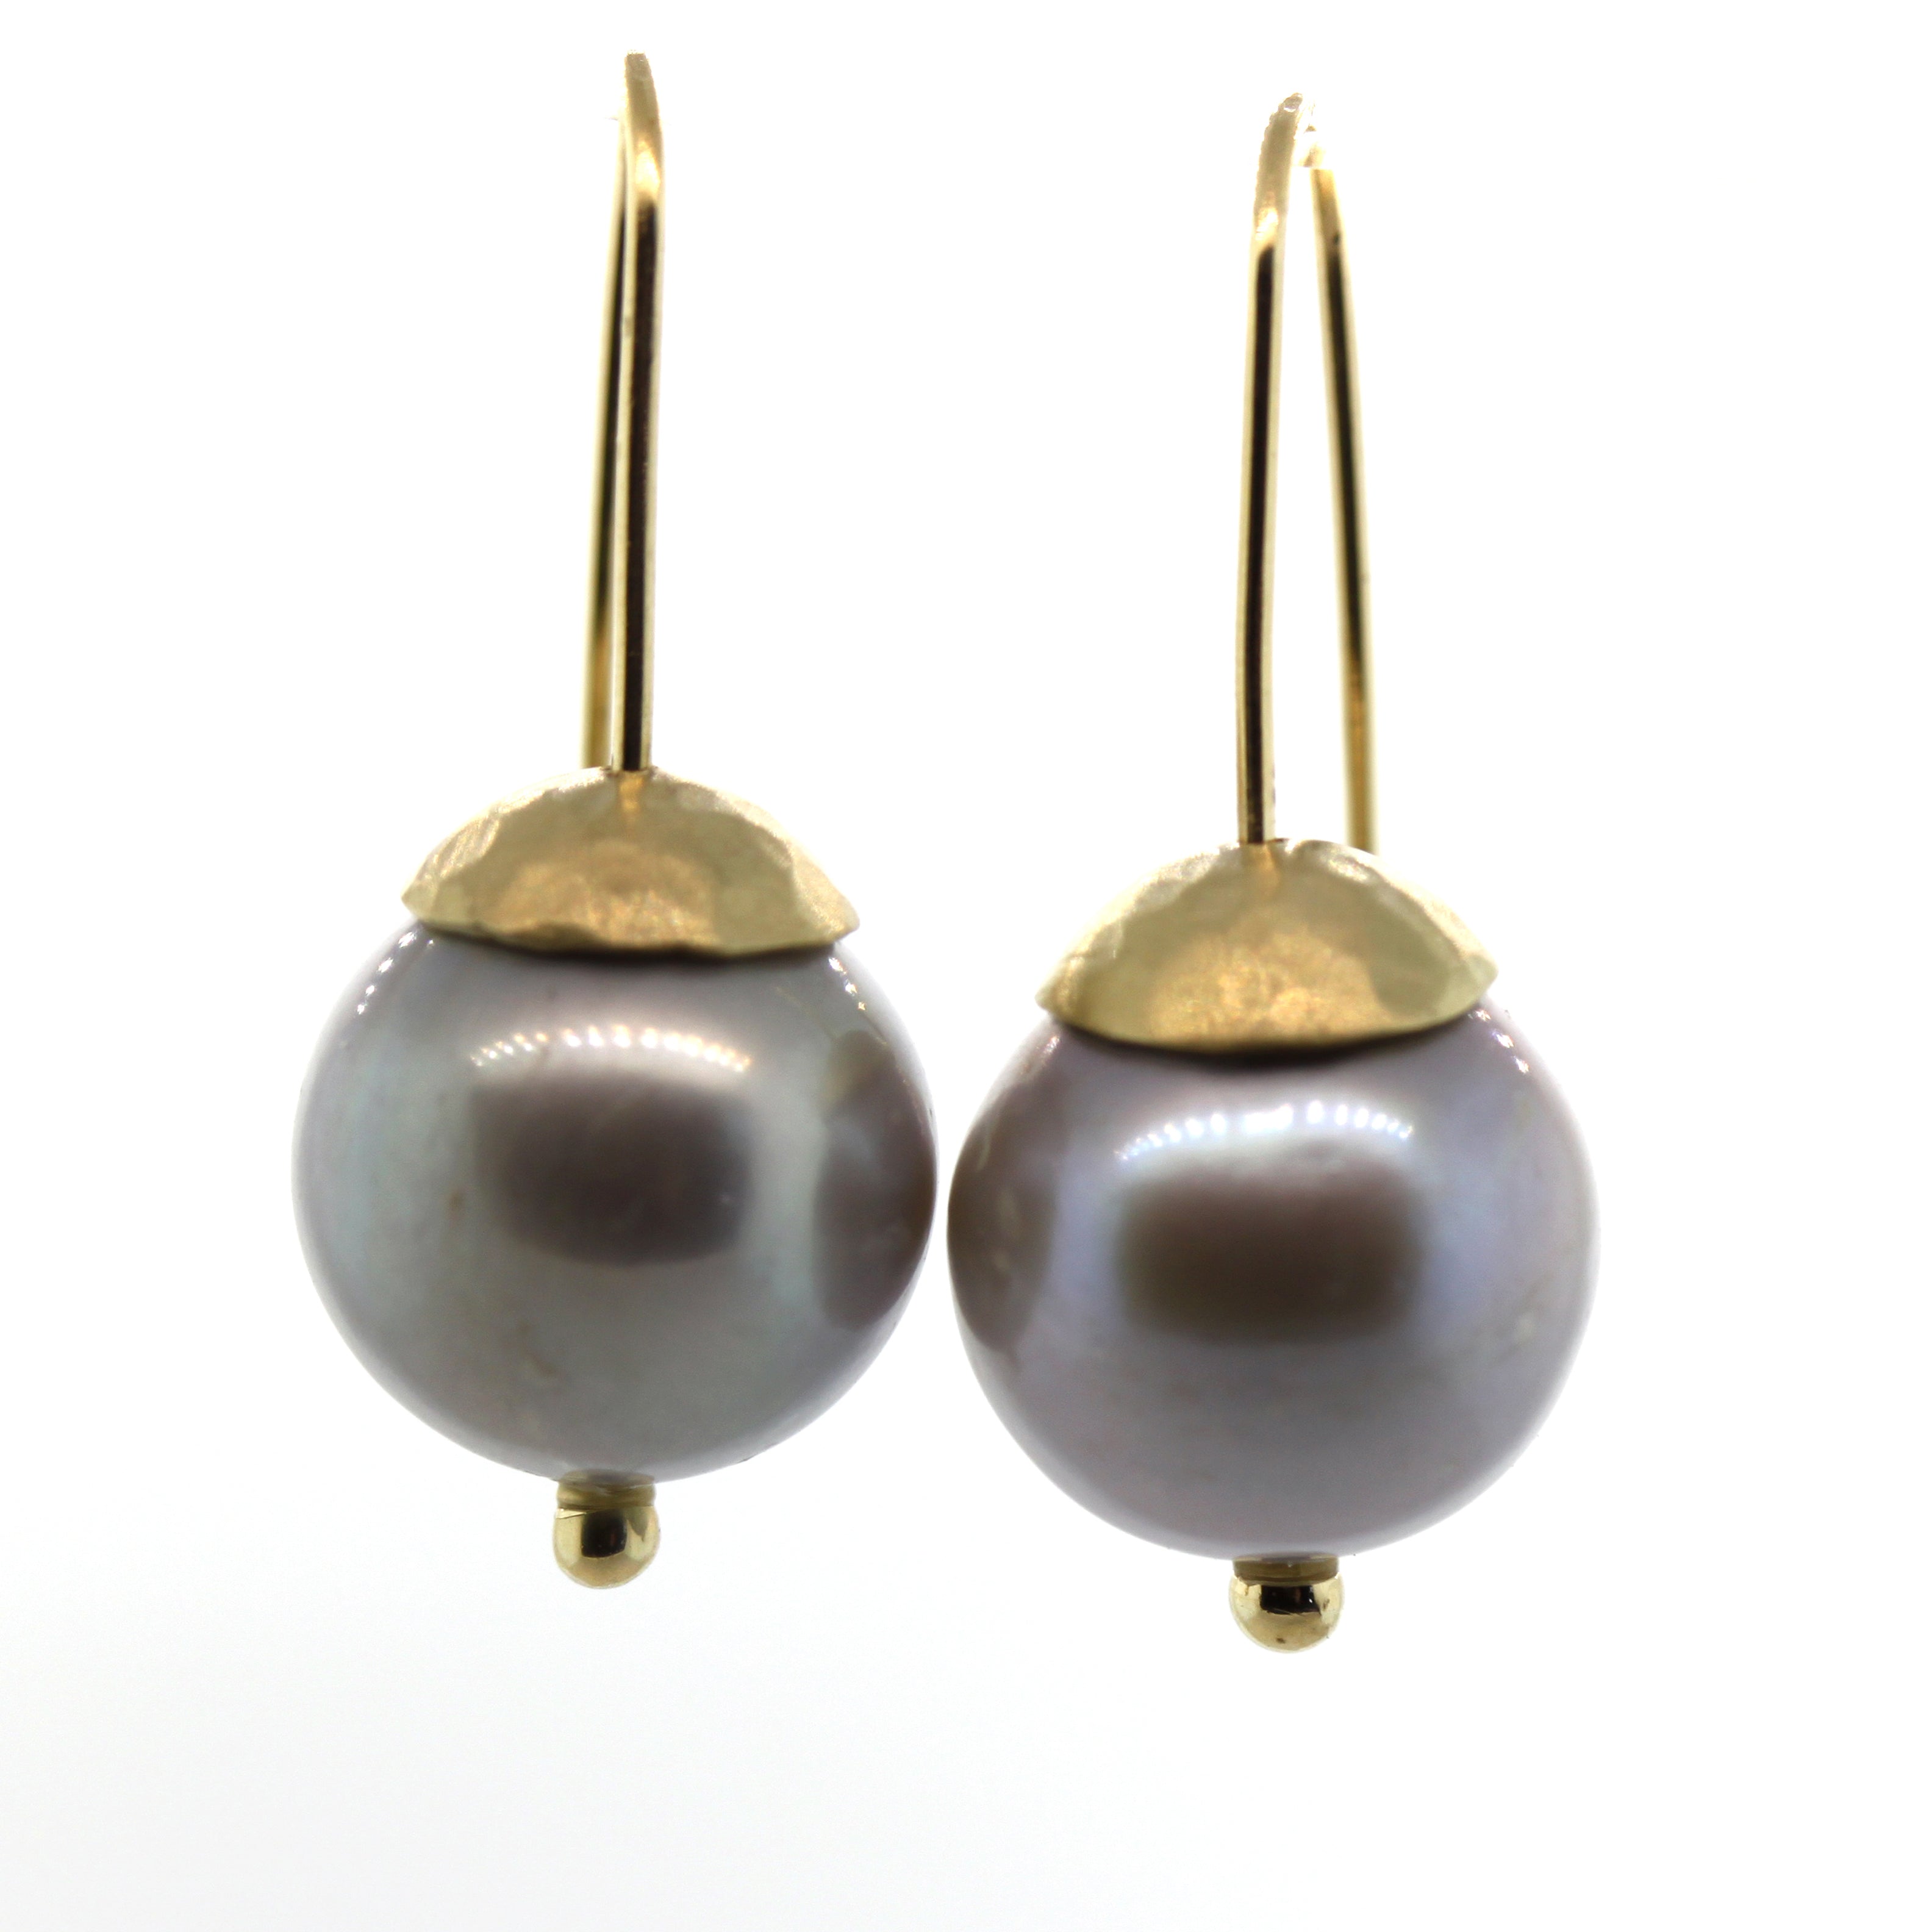 Grey pearl earrings handcrafted by Rebecca Lankford in Houston Heights, Houston, Texas